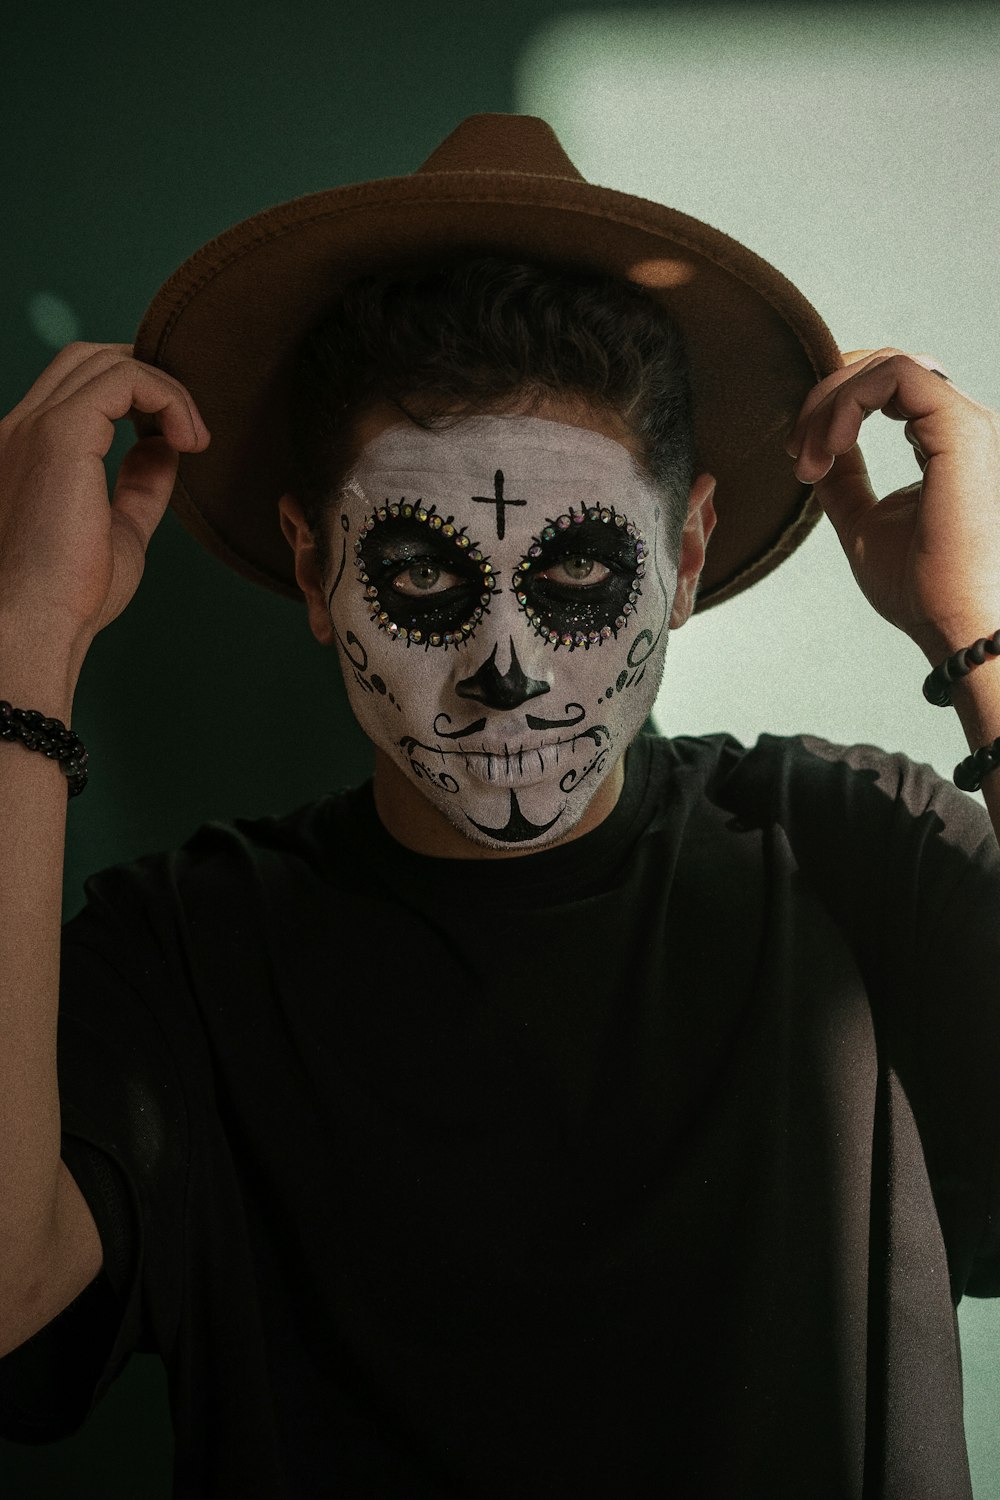 a man with a face painted like a skeleton photo – Free Male model Image on  Unsplash